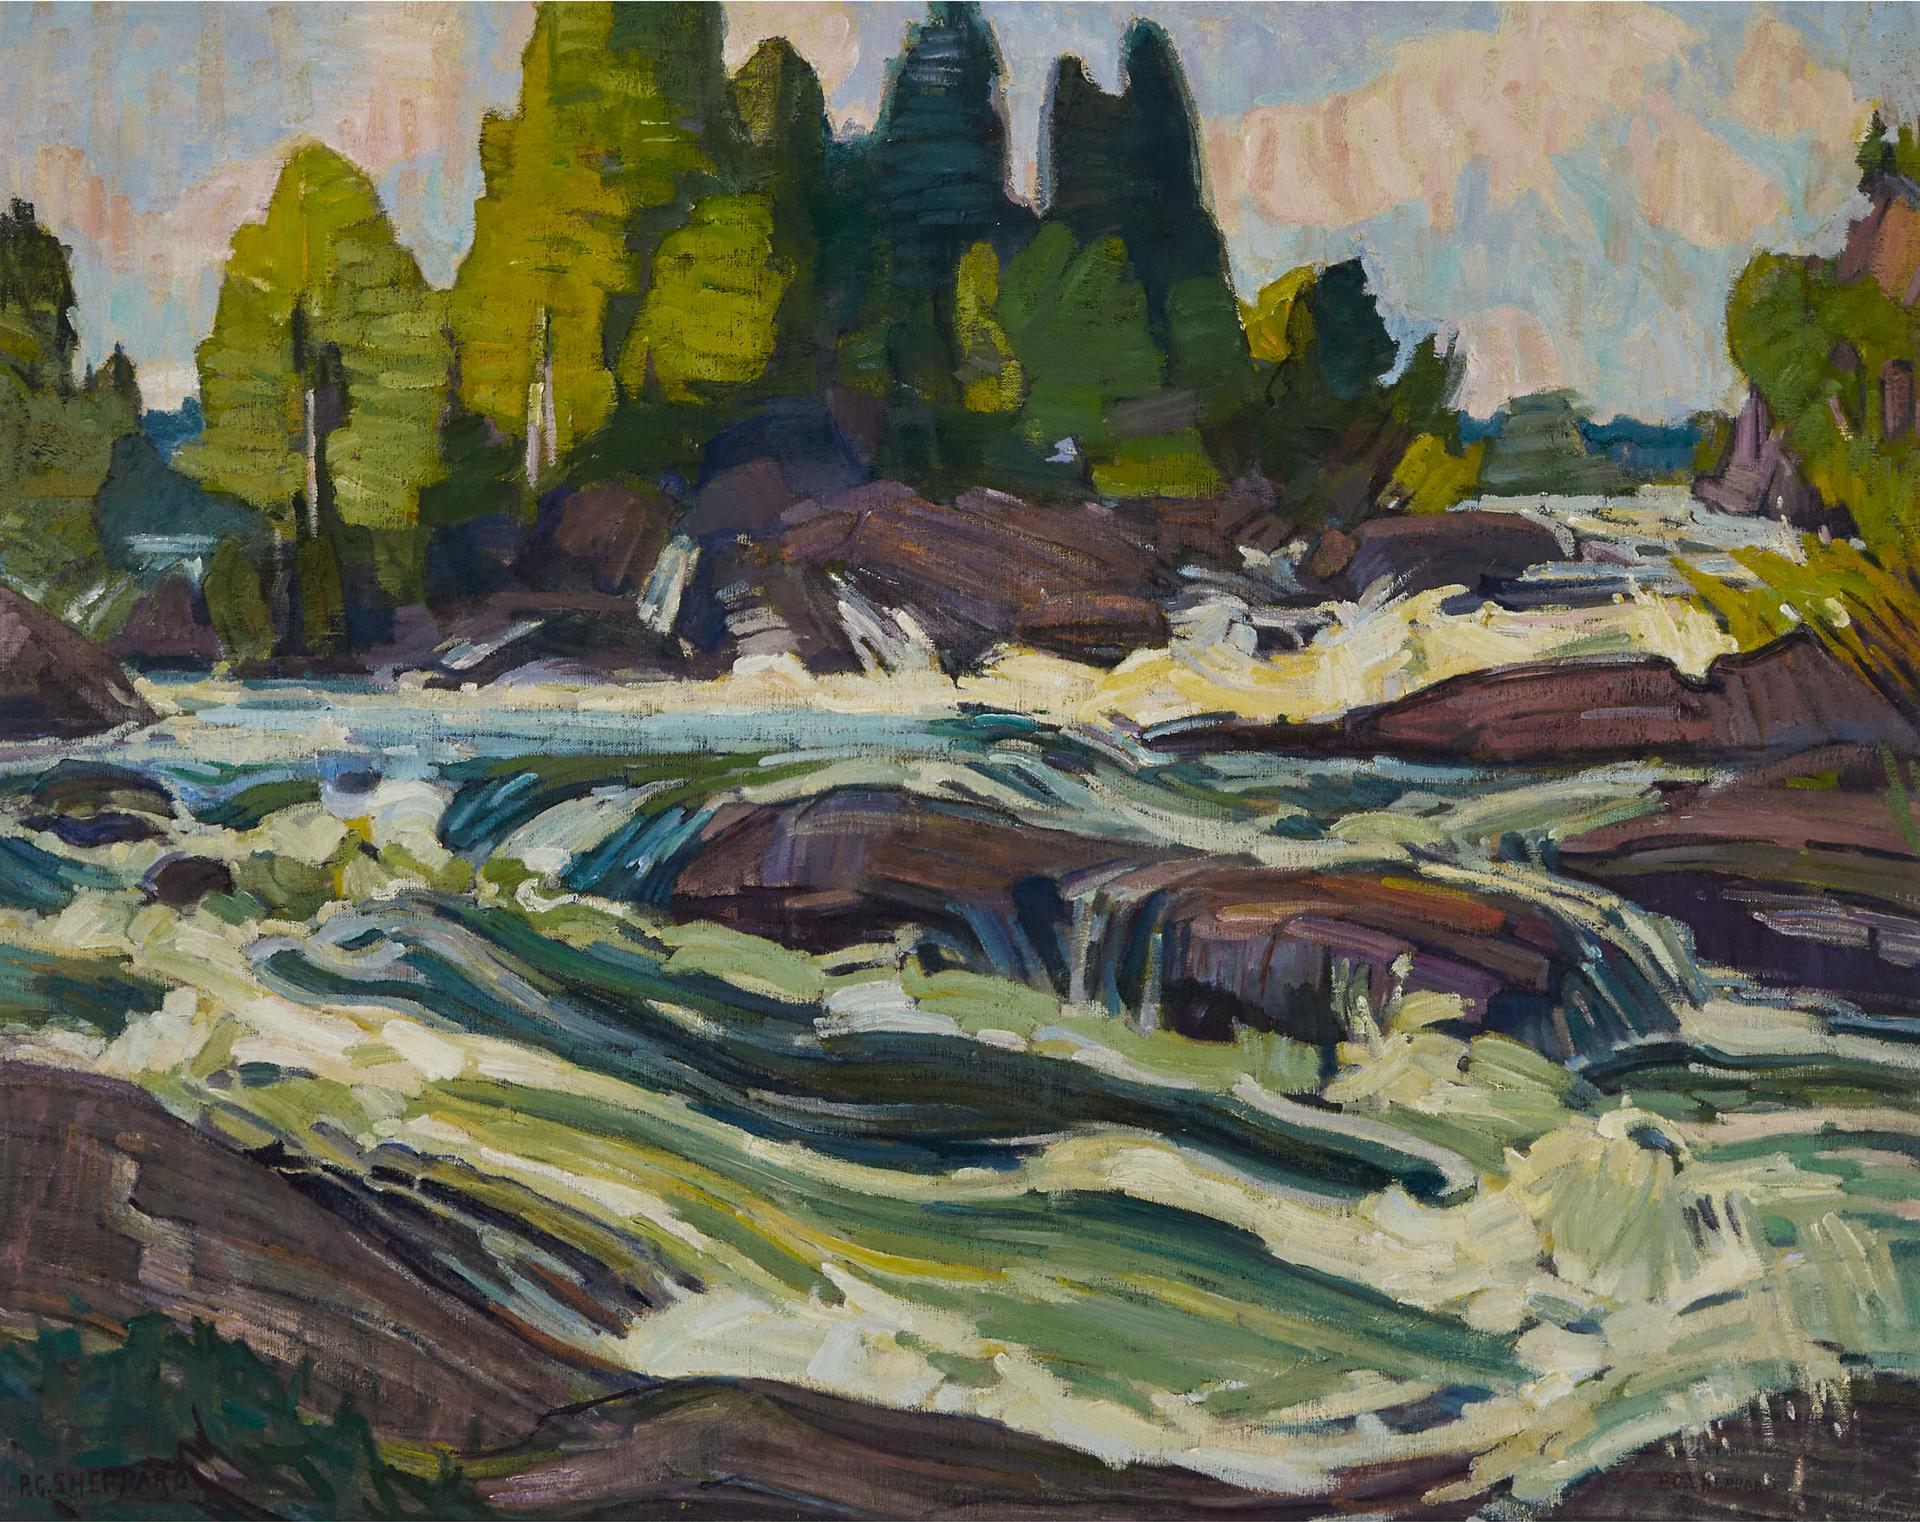 Peter Clapham (P.C.) Sheppard (1882-1965) - Lady Evelyn River, Temagami, Circa 1935